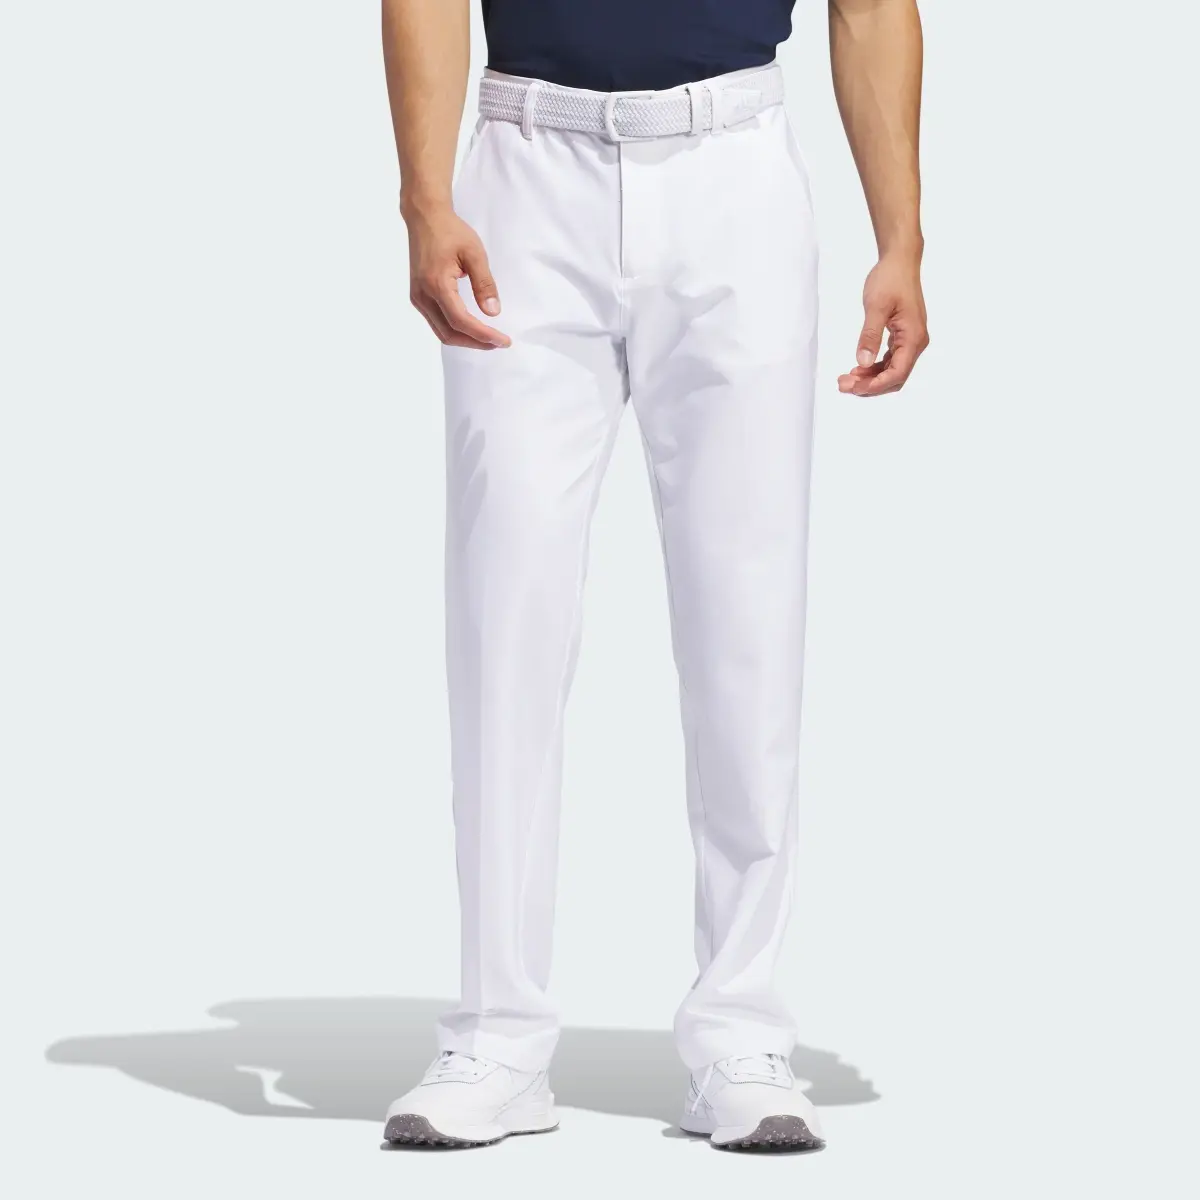 Adidas Ultimate365 Golf Trousers. 1